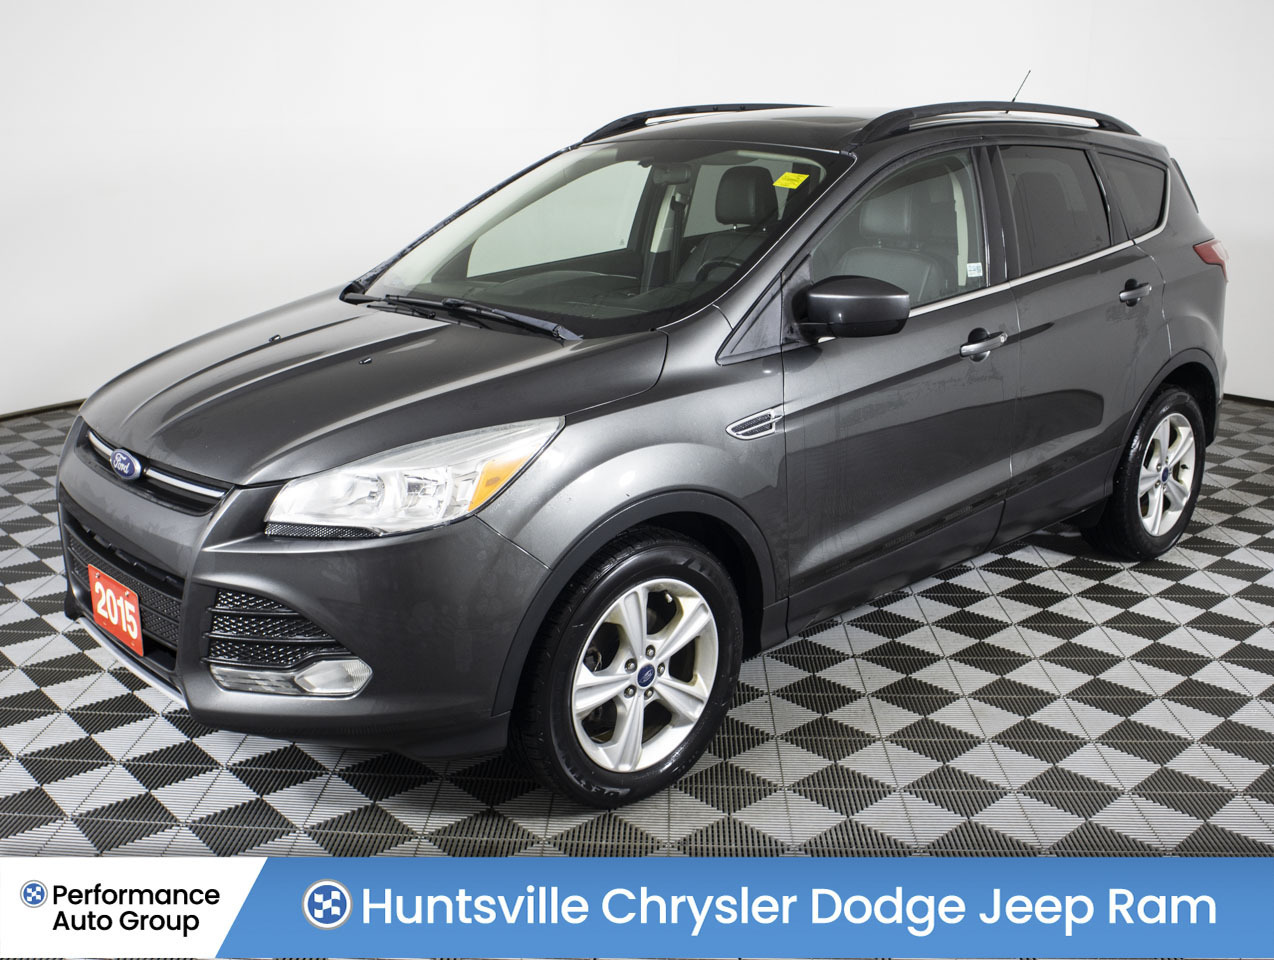 2015 Ford Escape SE- 1.6L EcoBoost- FWD- Moonroof- Leather